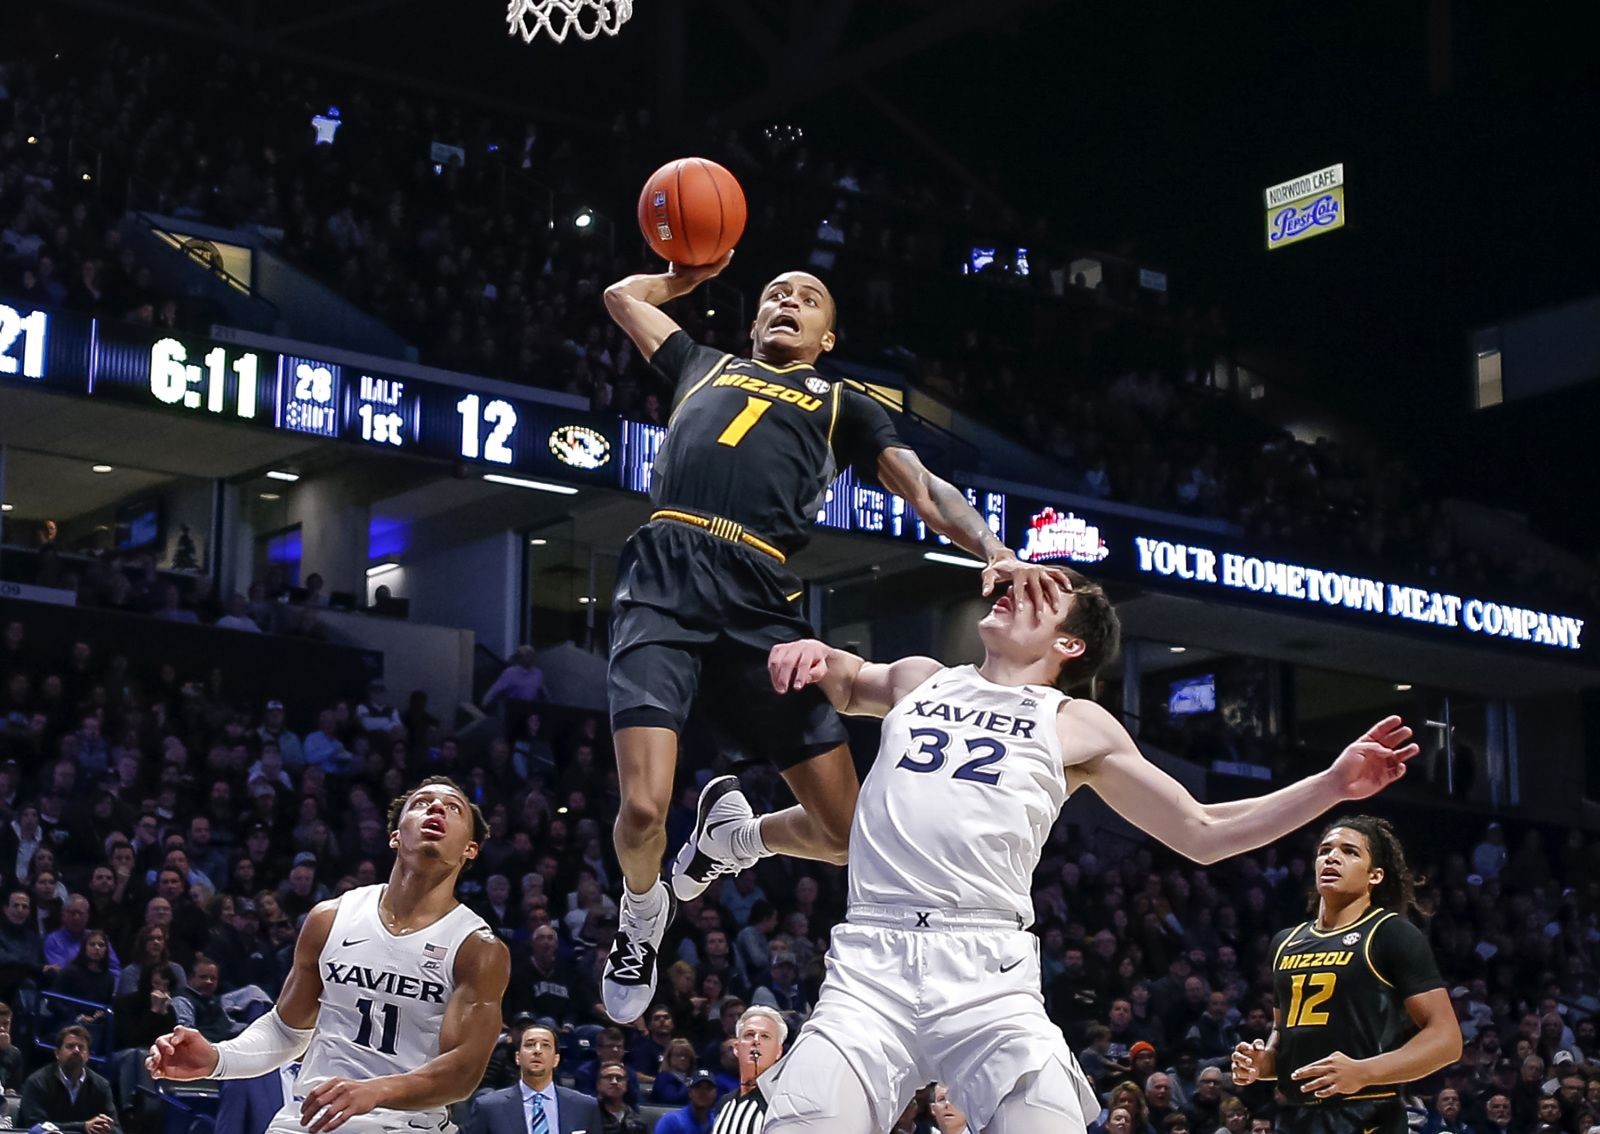 Mizzou basketball Tigers enter stacked Hall of Fame Classic